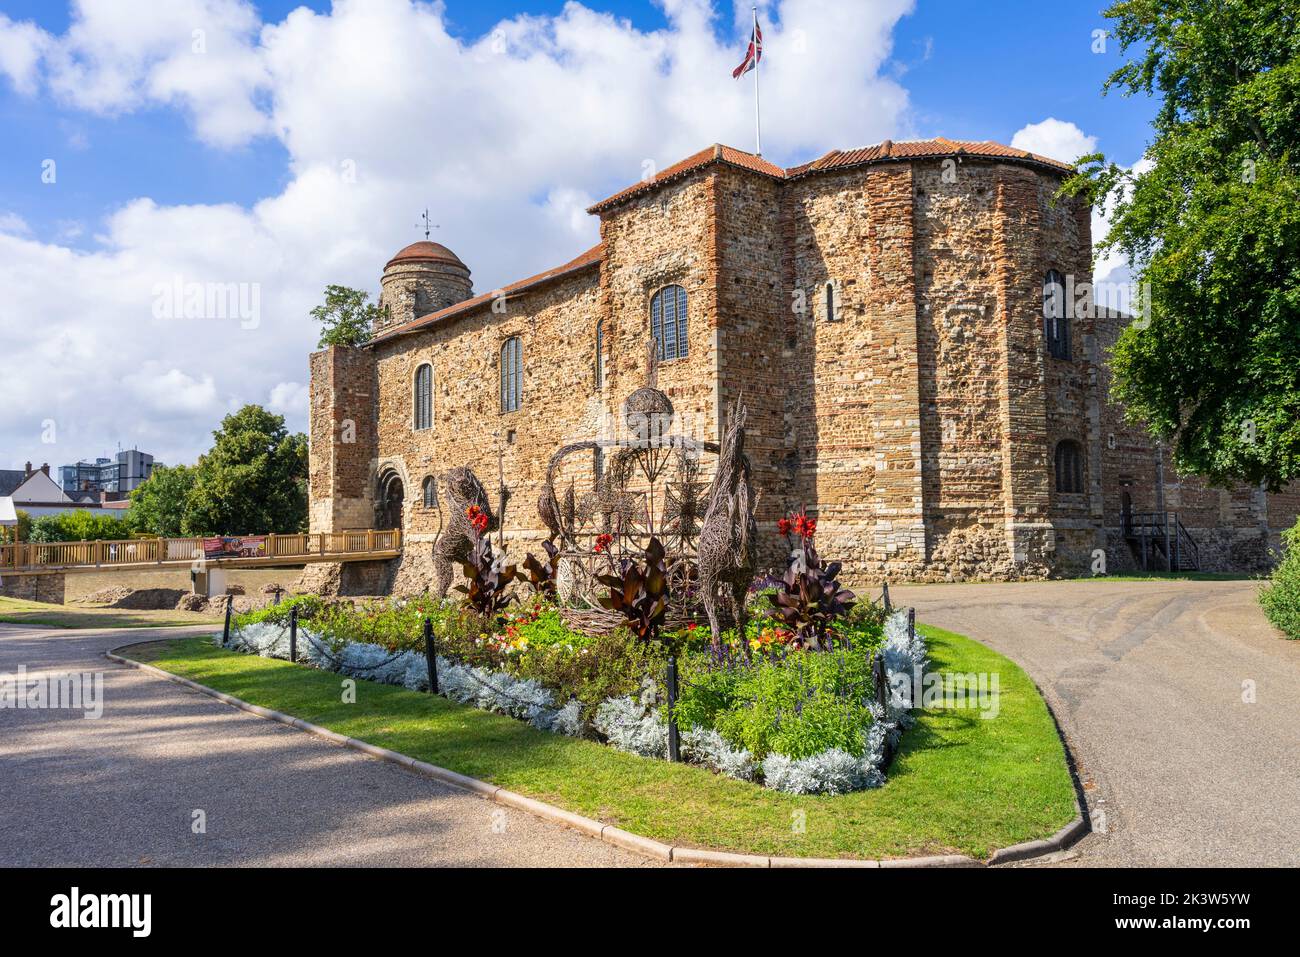 Flower beds in front of Colchester castle a Norman castle in Colchester Castle Park Colchester Essex England UK GB Europe Stock Photo